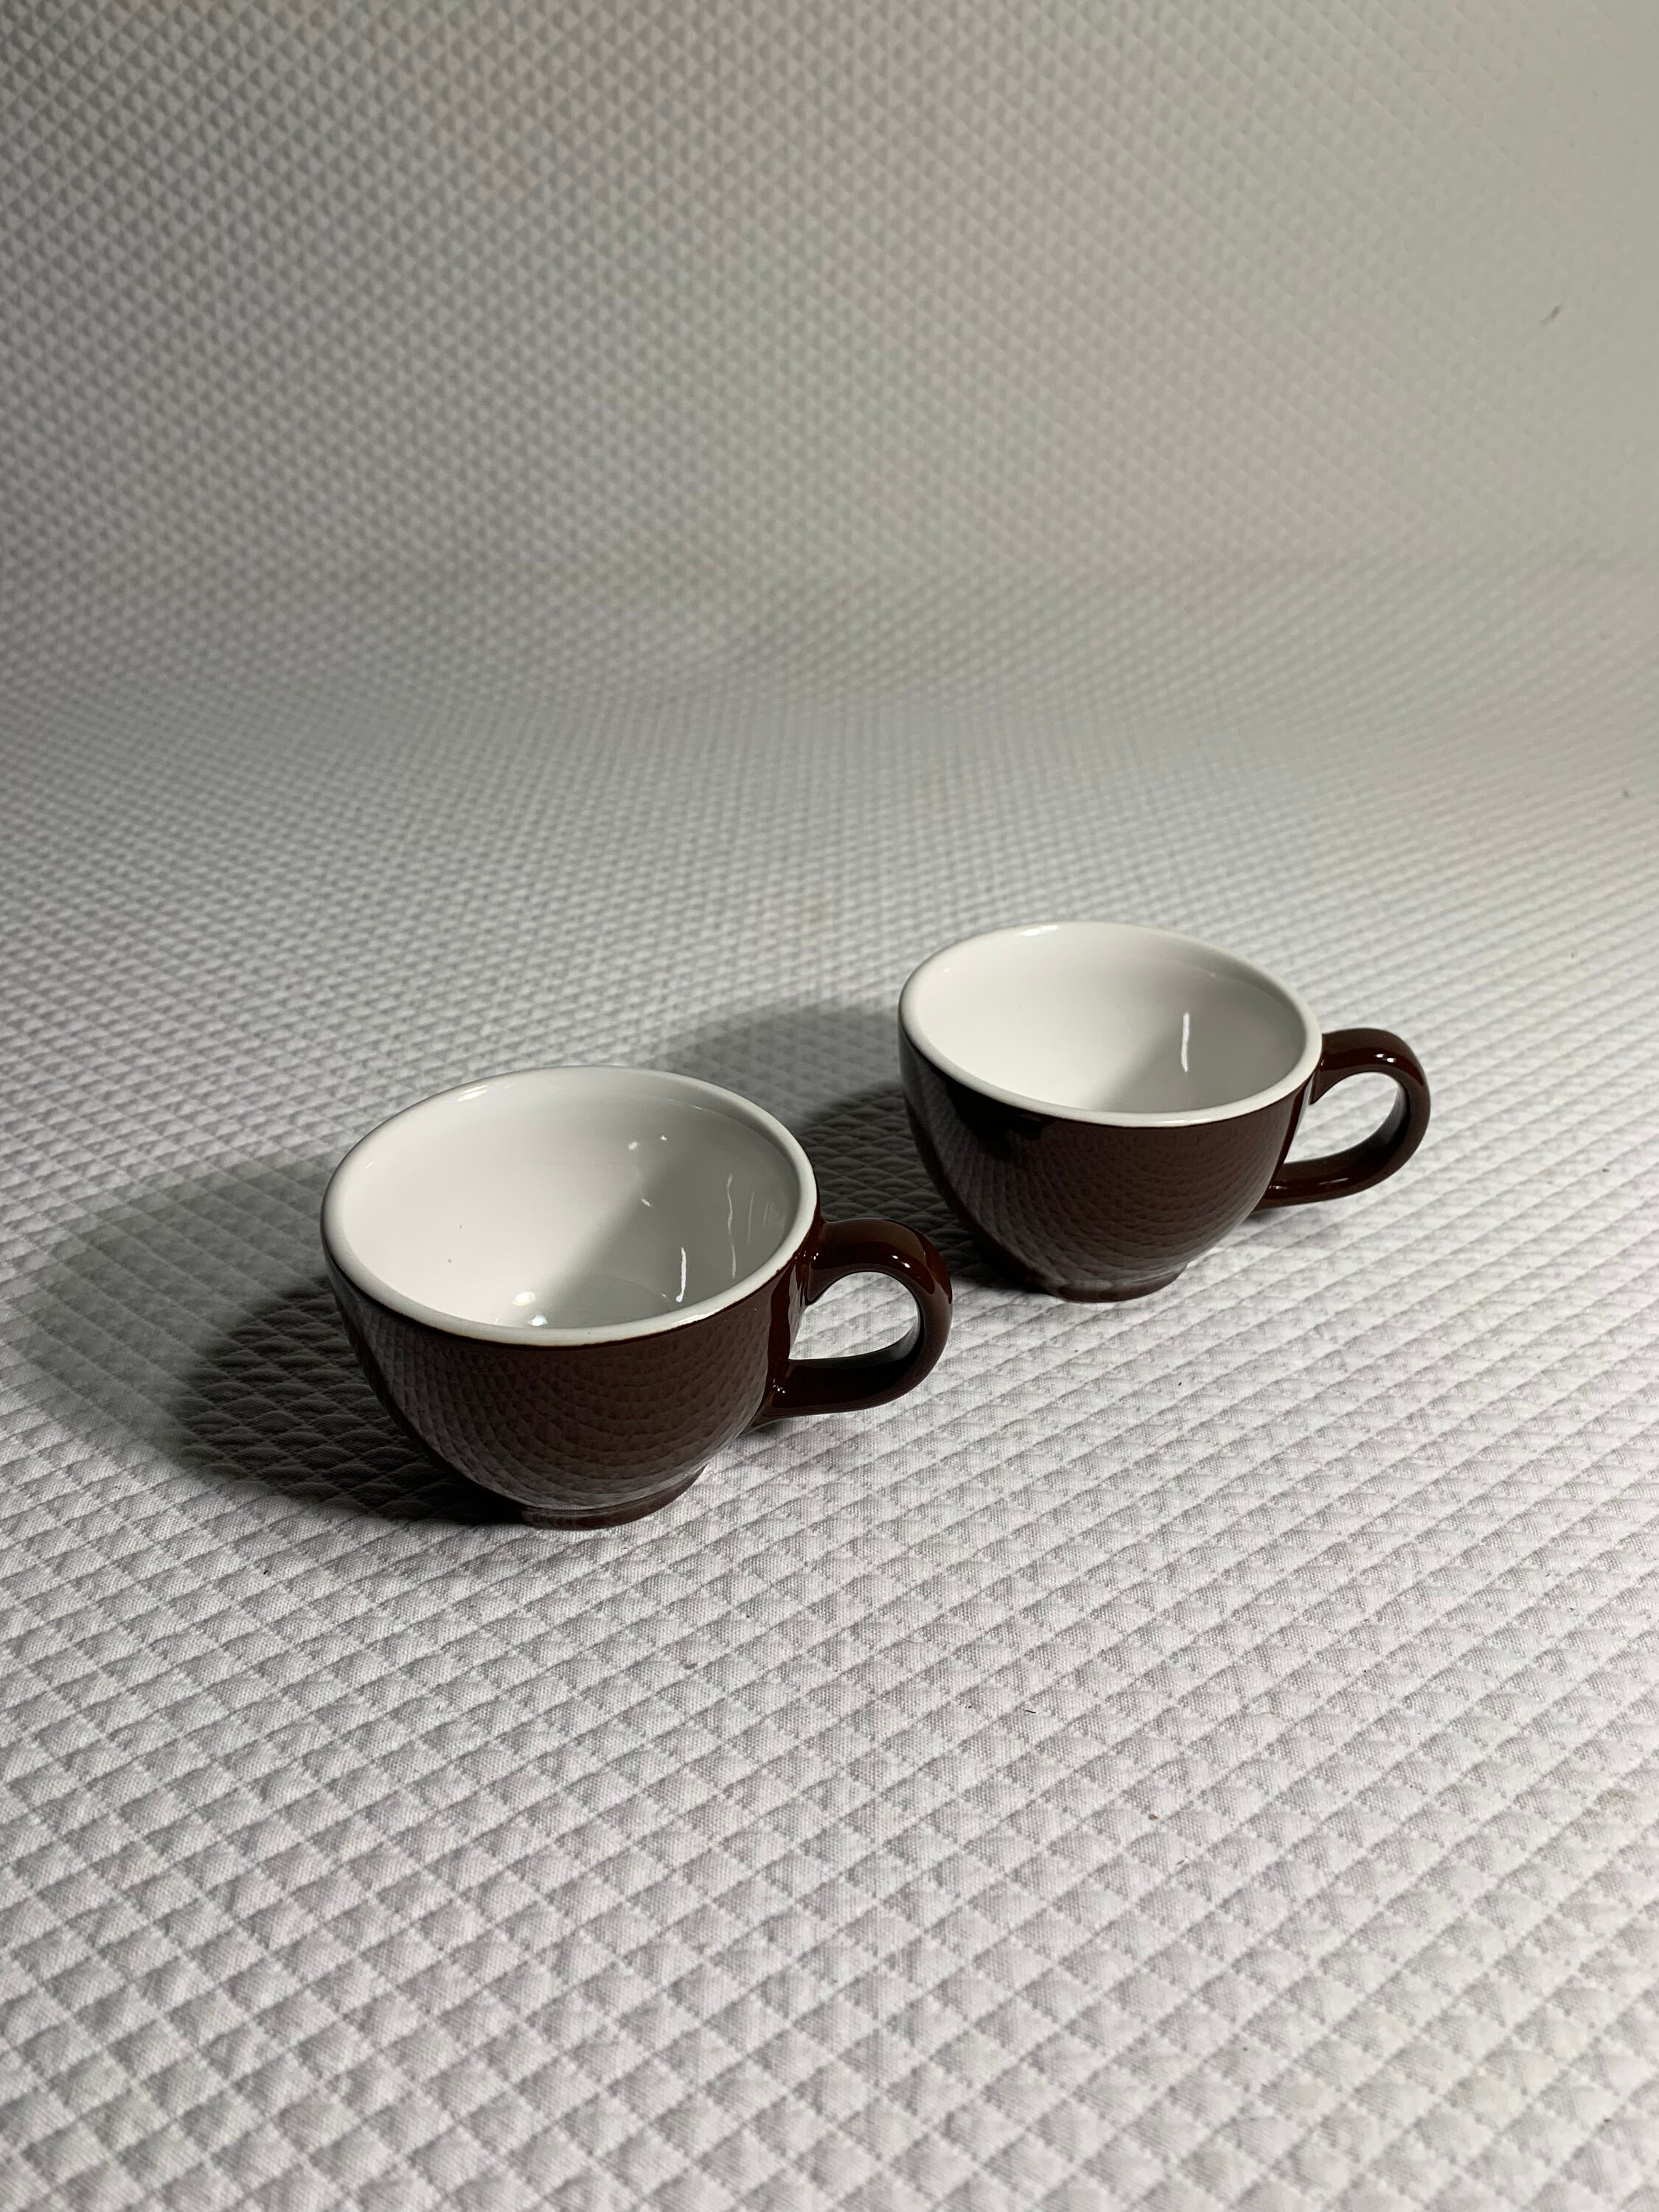 2 Pottery Black Cone Shape Espresso Cups, Set of Two 4oz Ceramic Cups With  Saucers, Small Mugs, Stoneware Tea Lovers Gift -  Finland